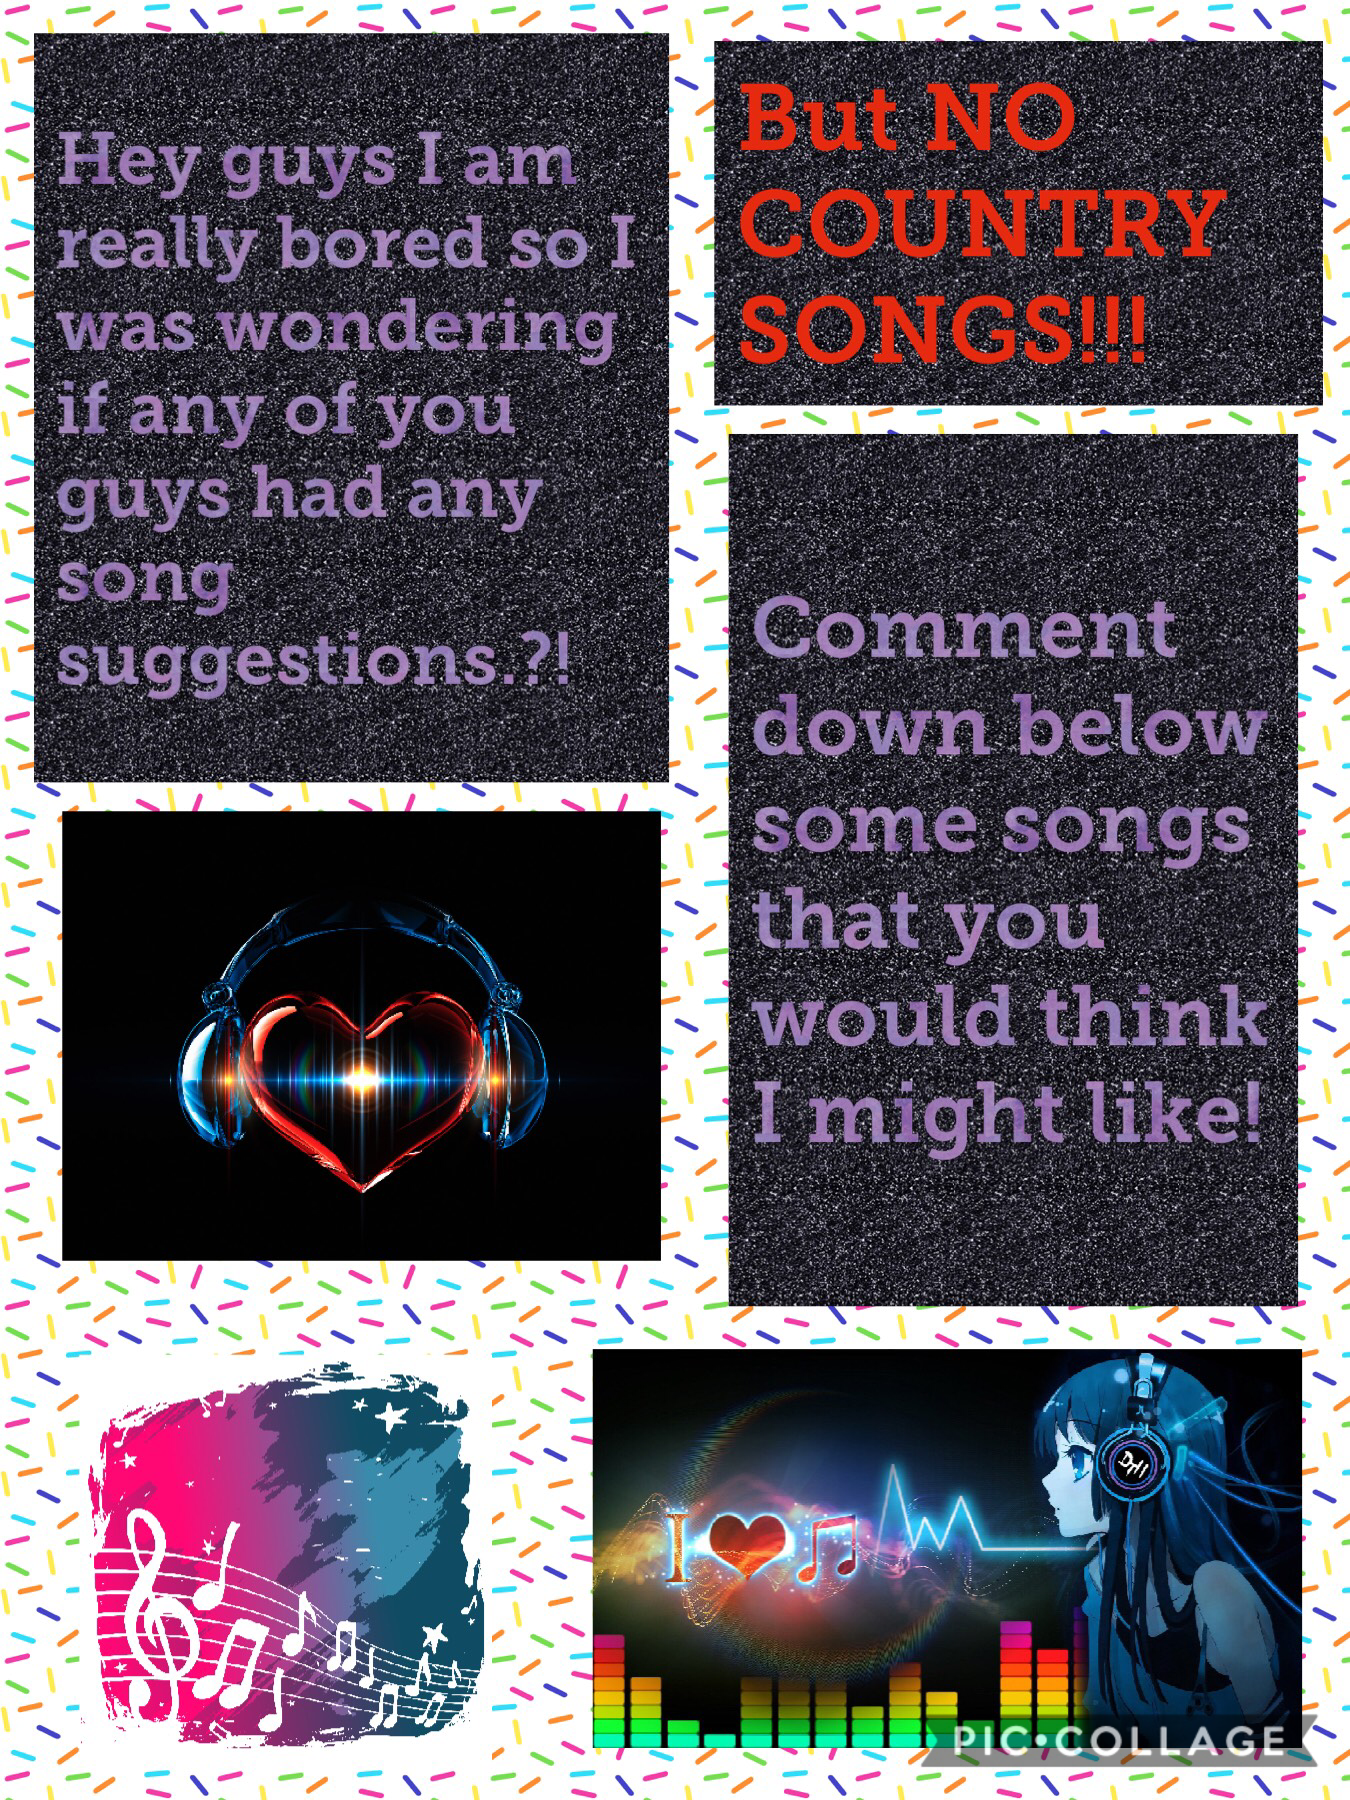 Please let me know if you know a song and it’s good that you let me know except for country songs!!! Thanks!😙😁😆